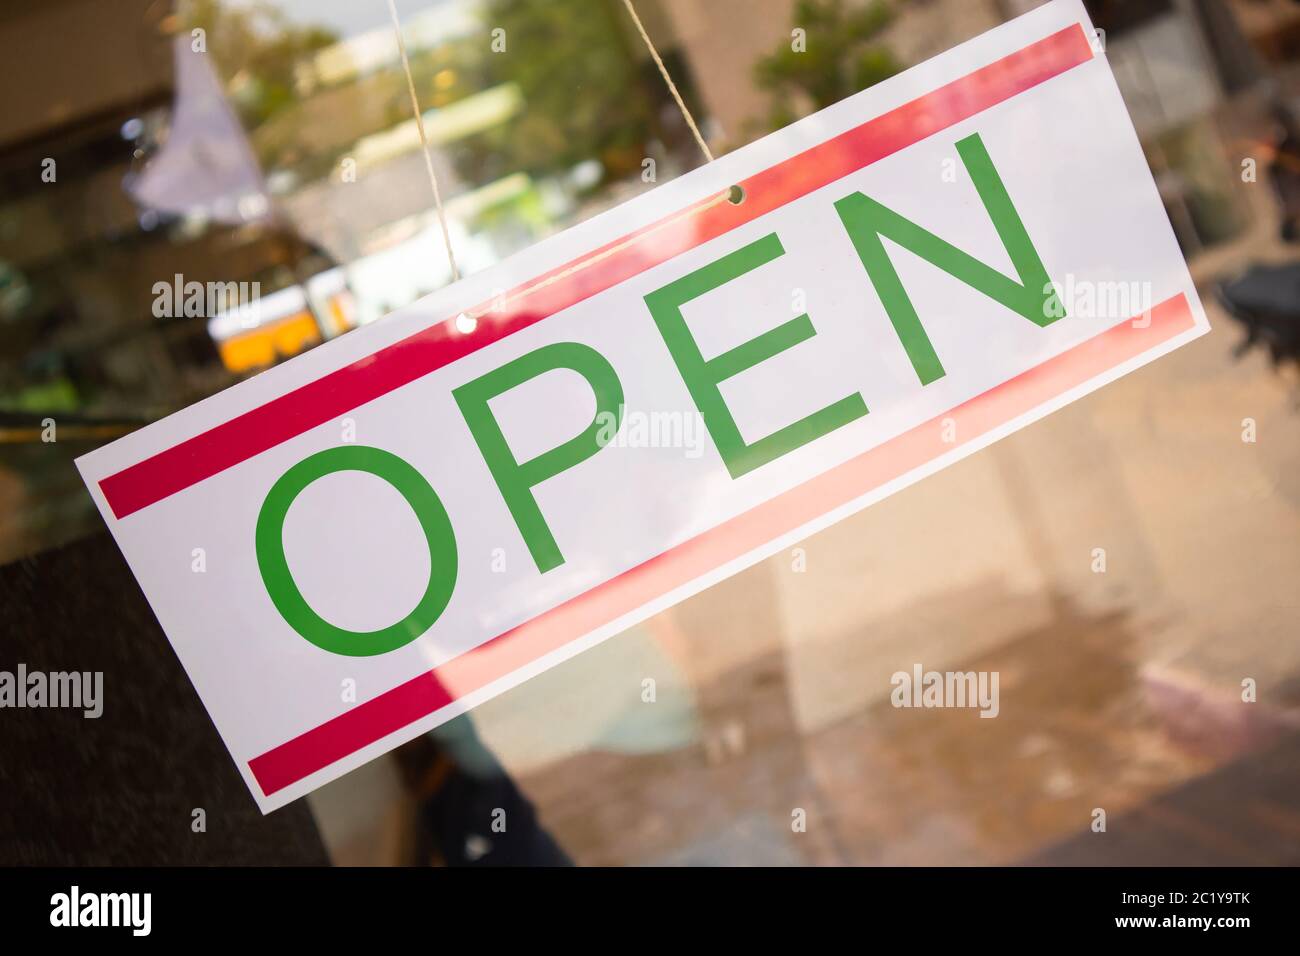 Open Signage board in front of Businesses or store door after covid-19 or coronavirus outbreak - Concept of back to business after lockdown. Stock Photo